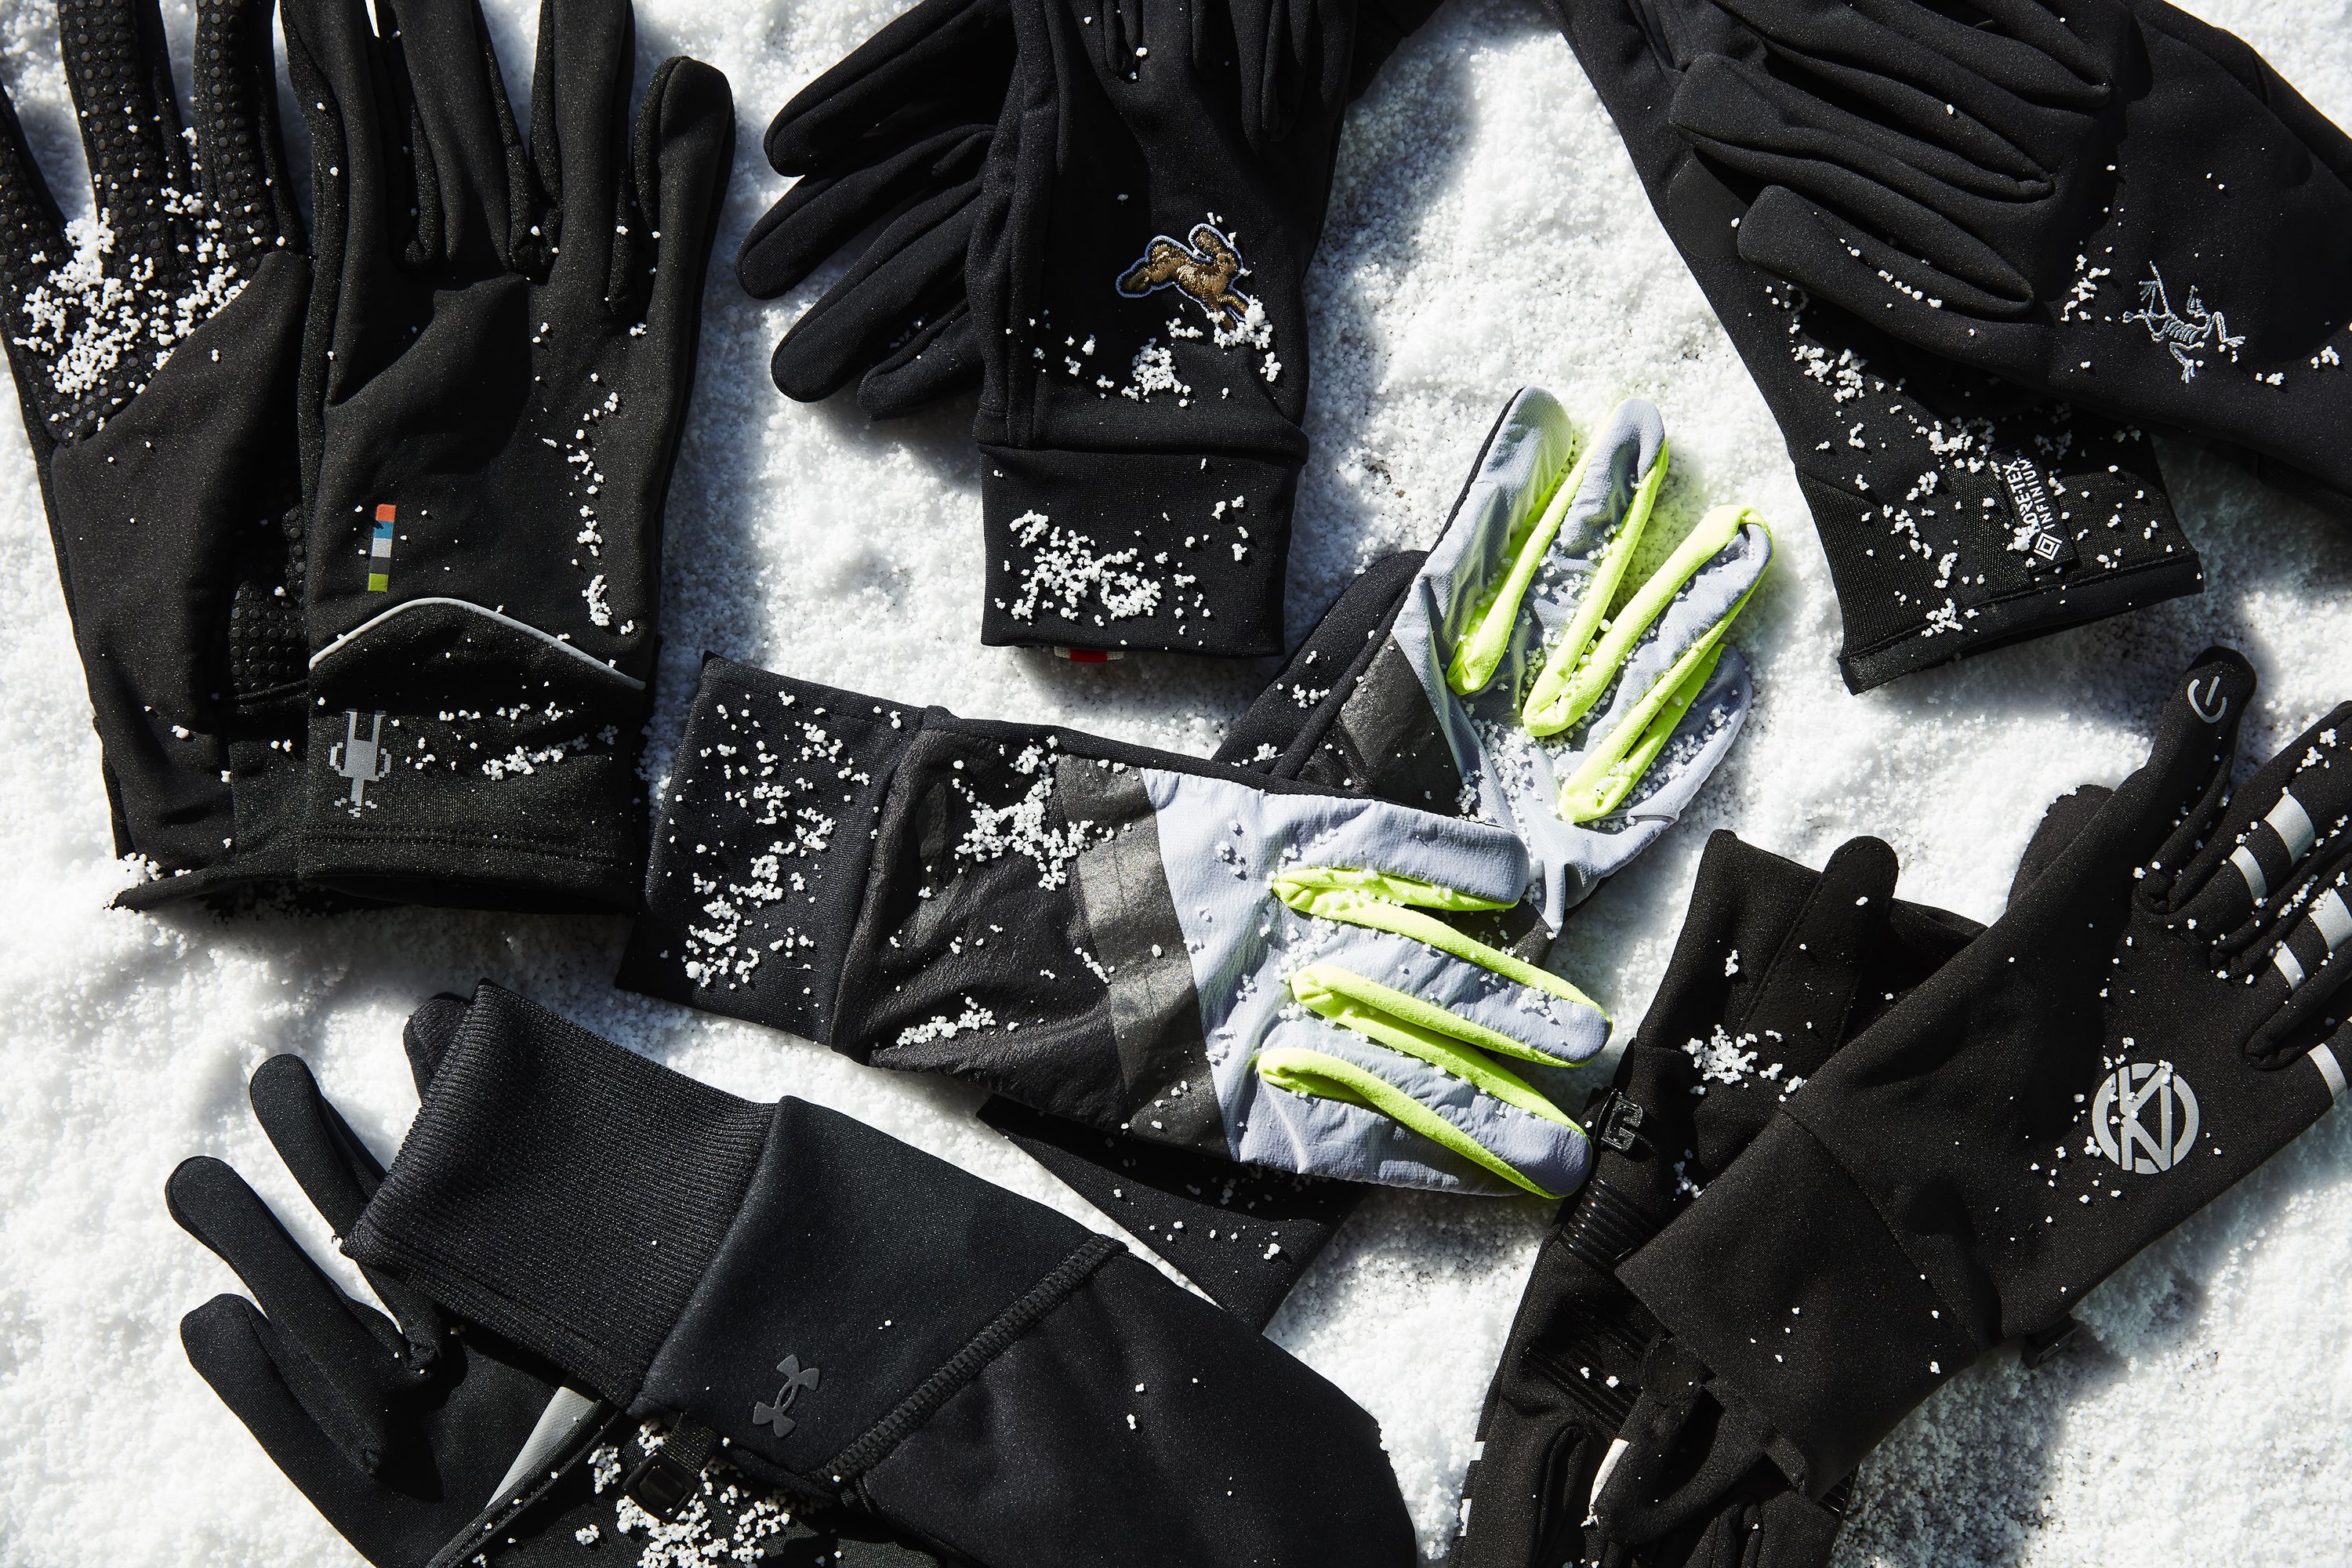 II. Why Hats and Gloves are Essential for Winter Running